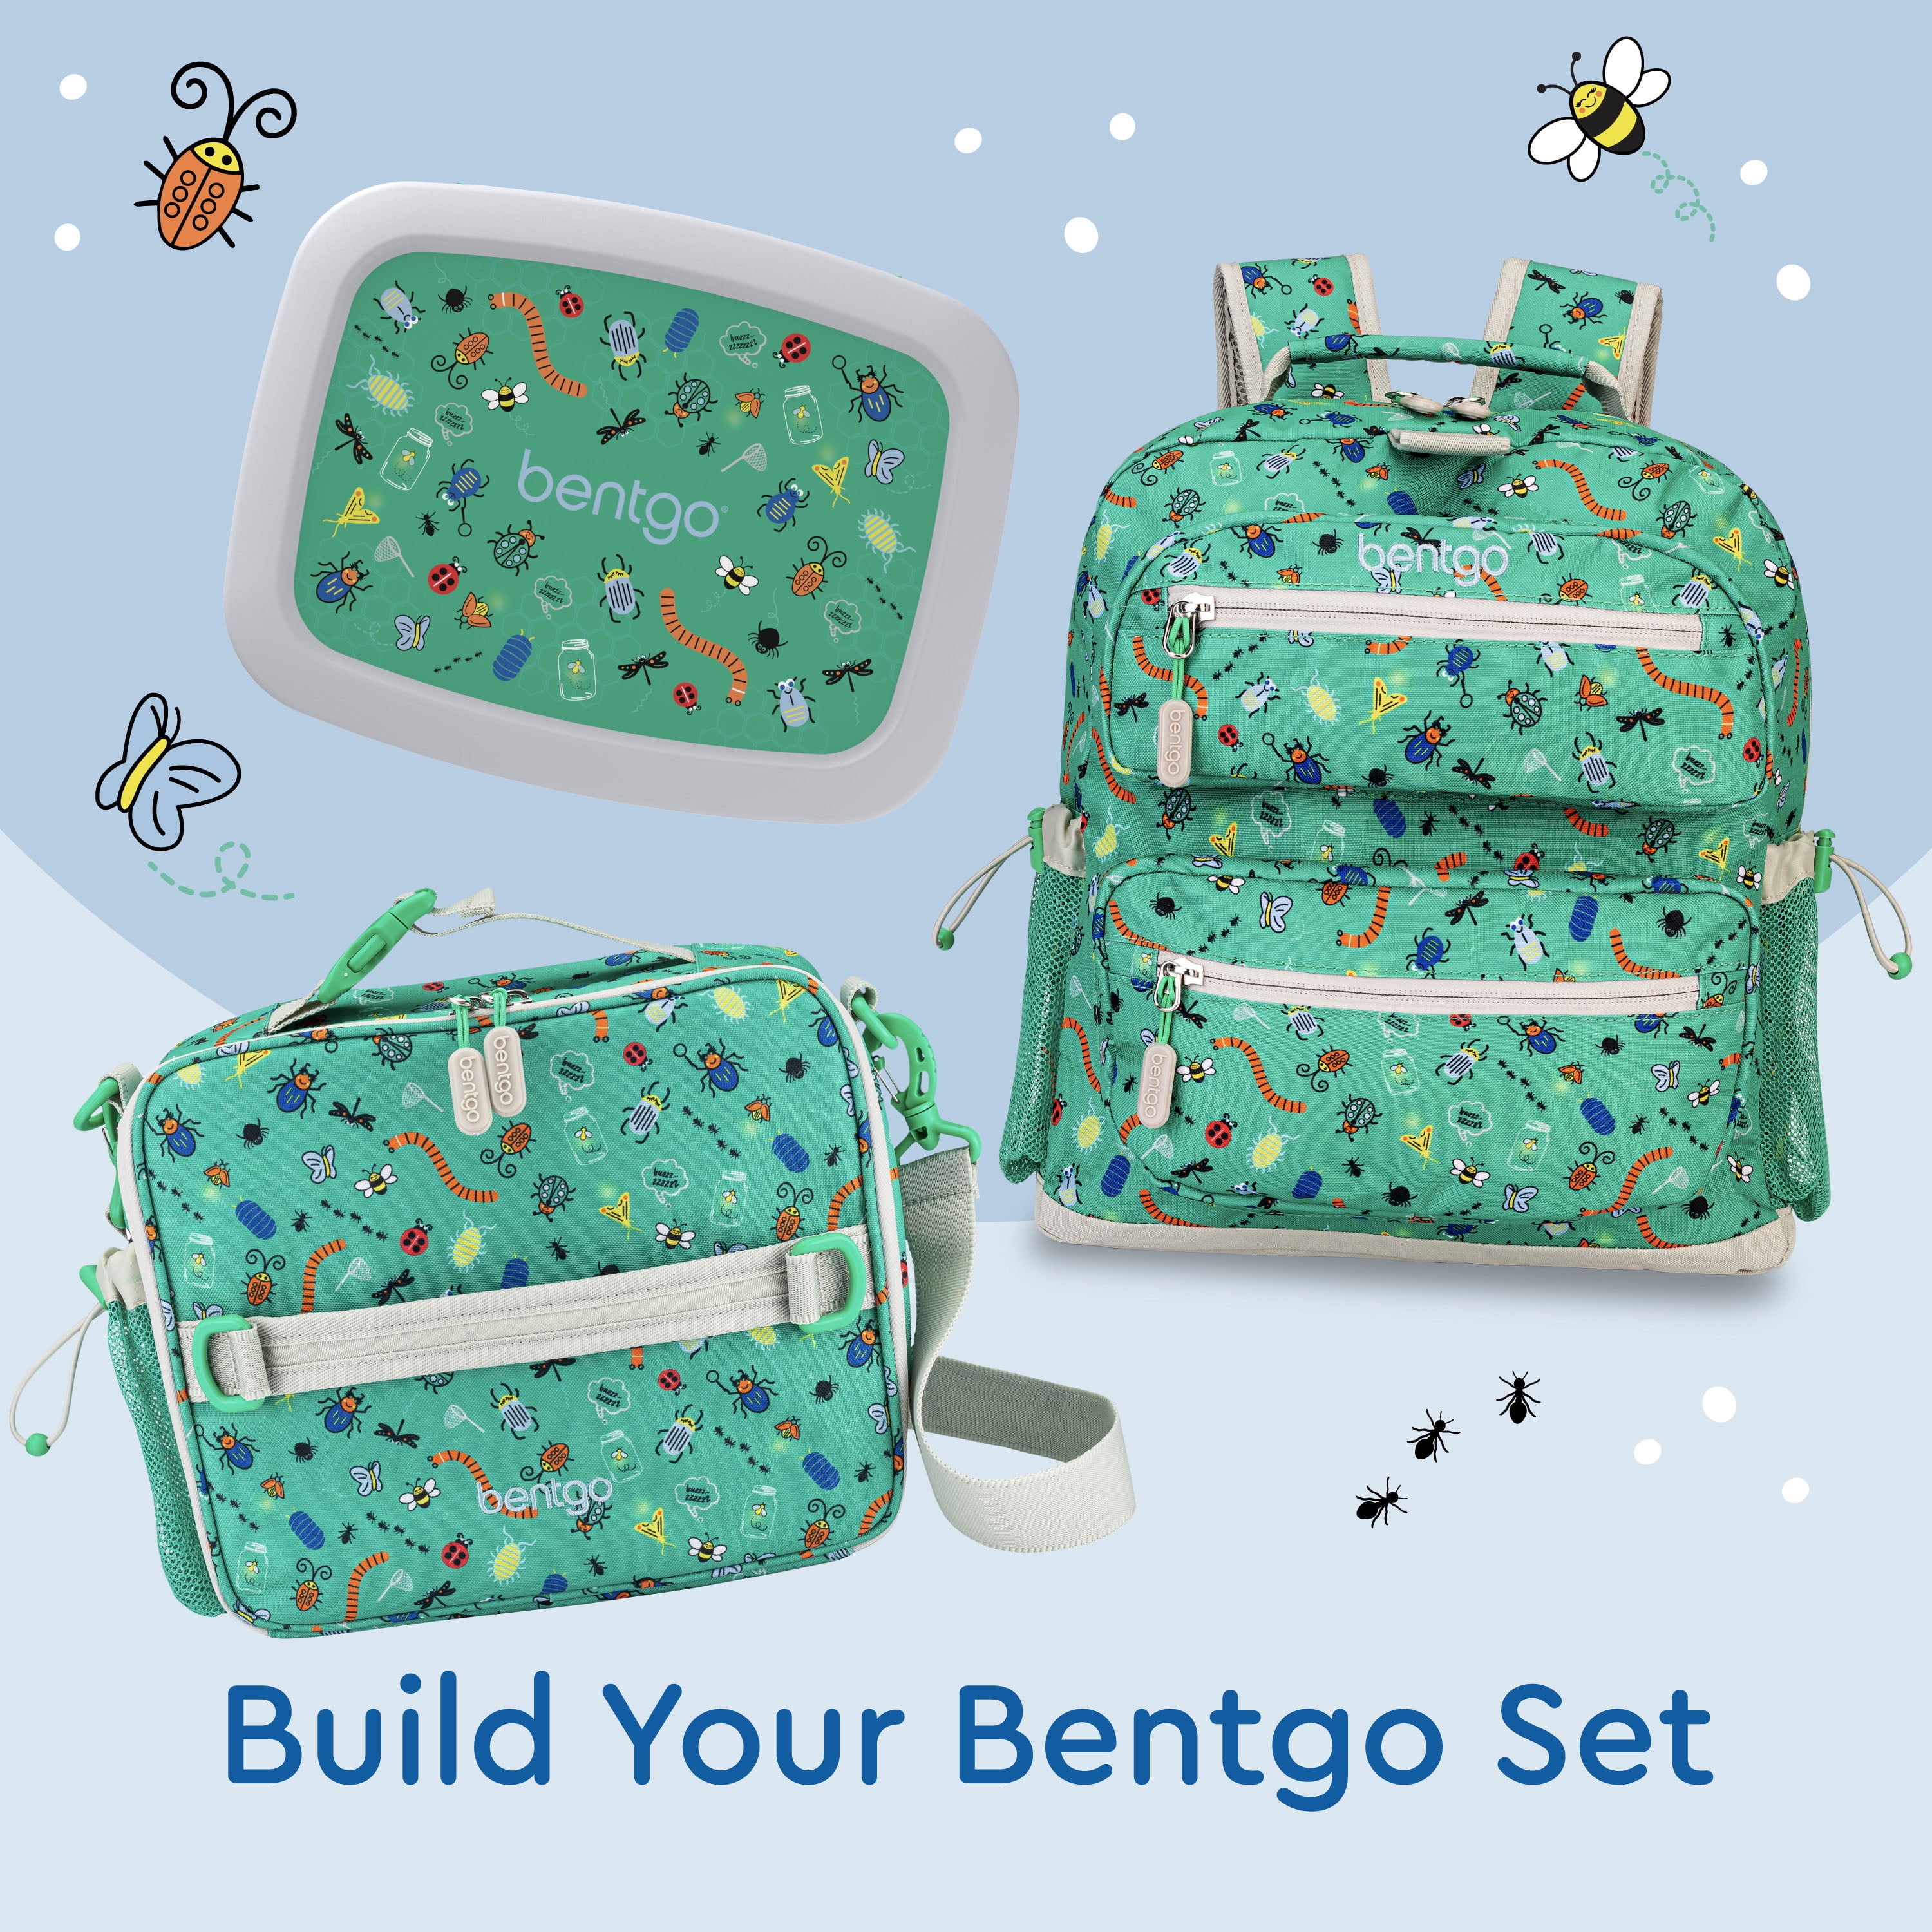 Bentgo Kids' Prints Double Insulated Lunch Bag, Durable, Water-resistant  Fabric, Bottle Holder - Construction Trucks : Target